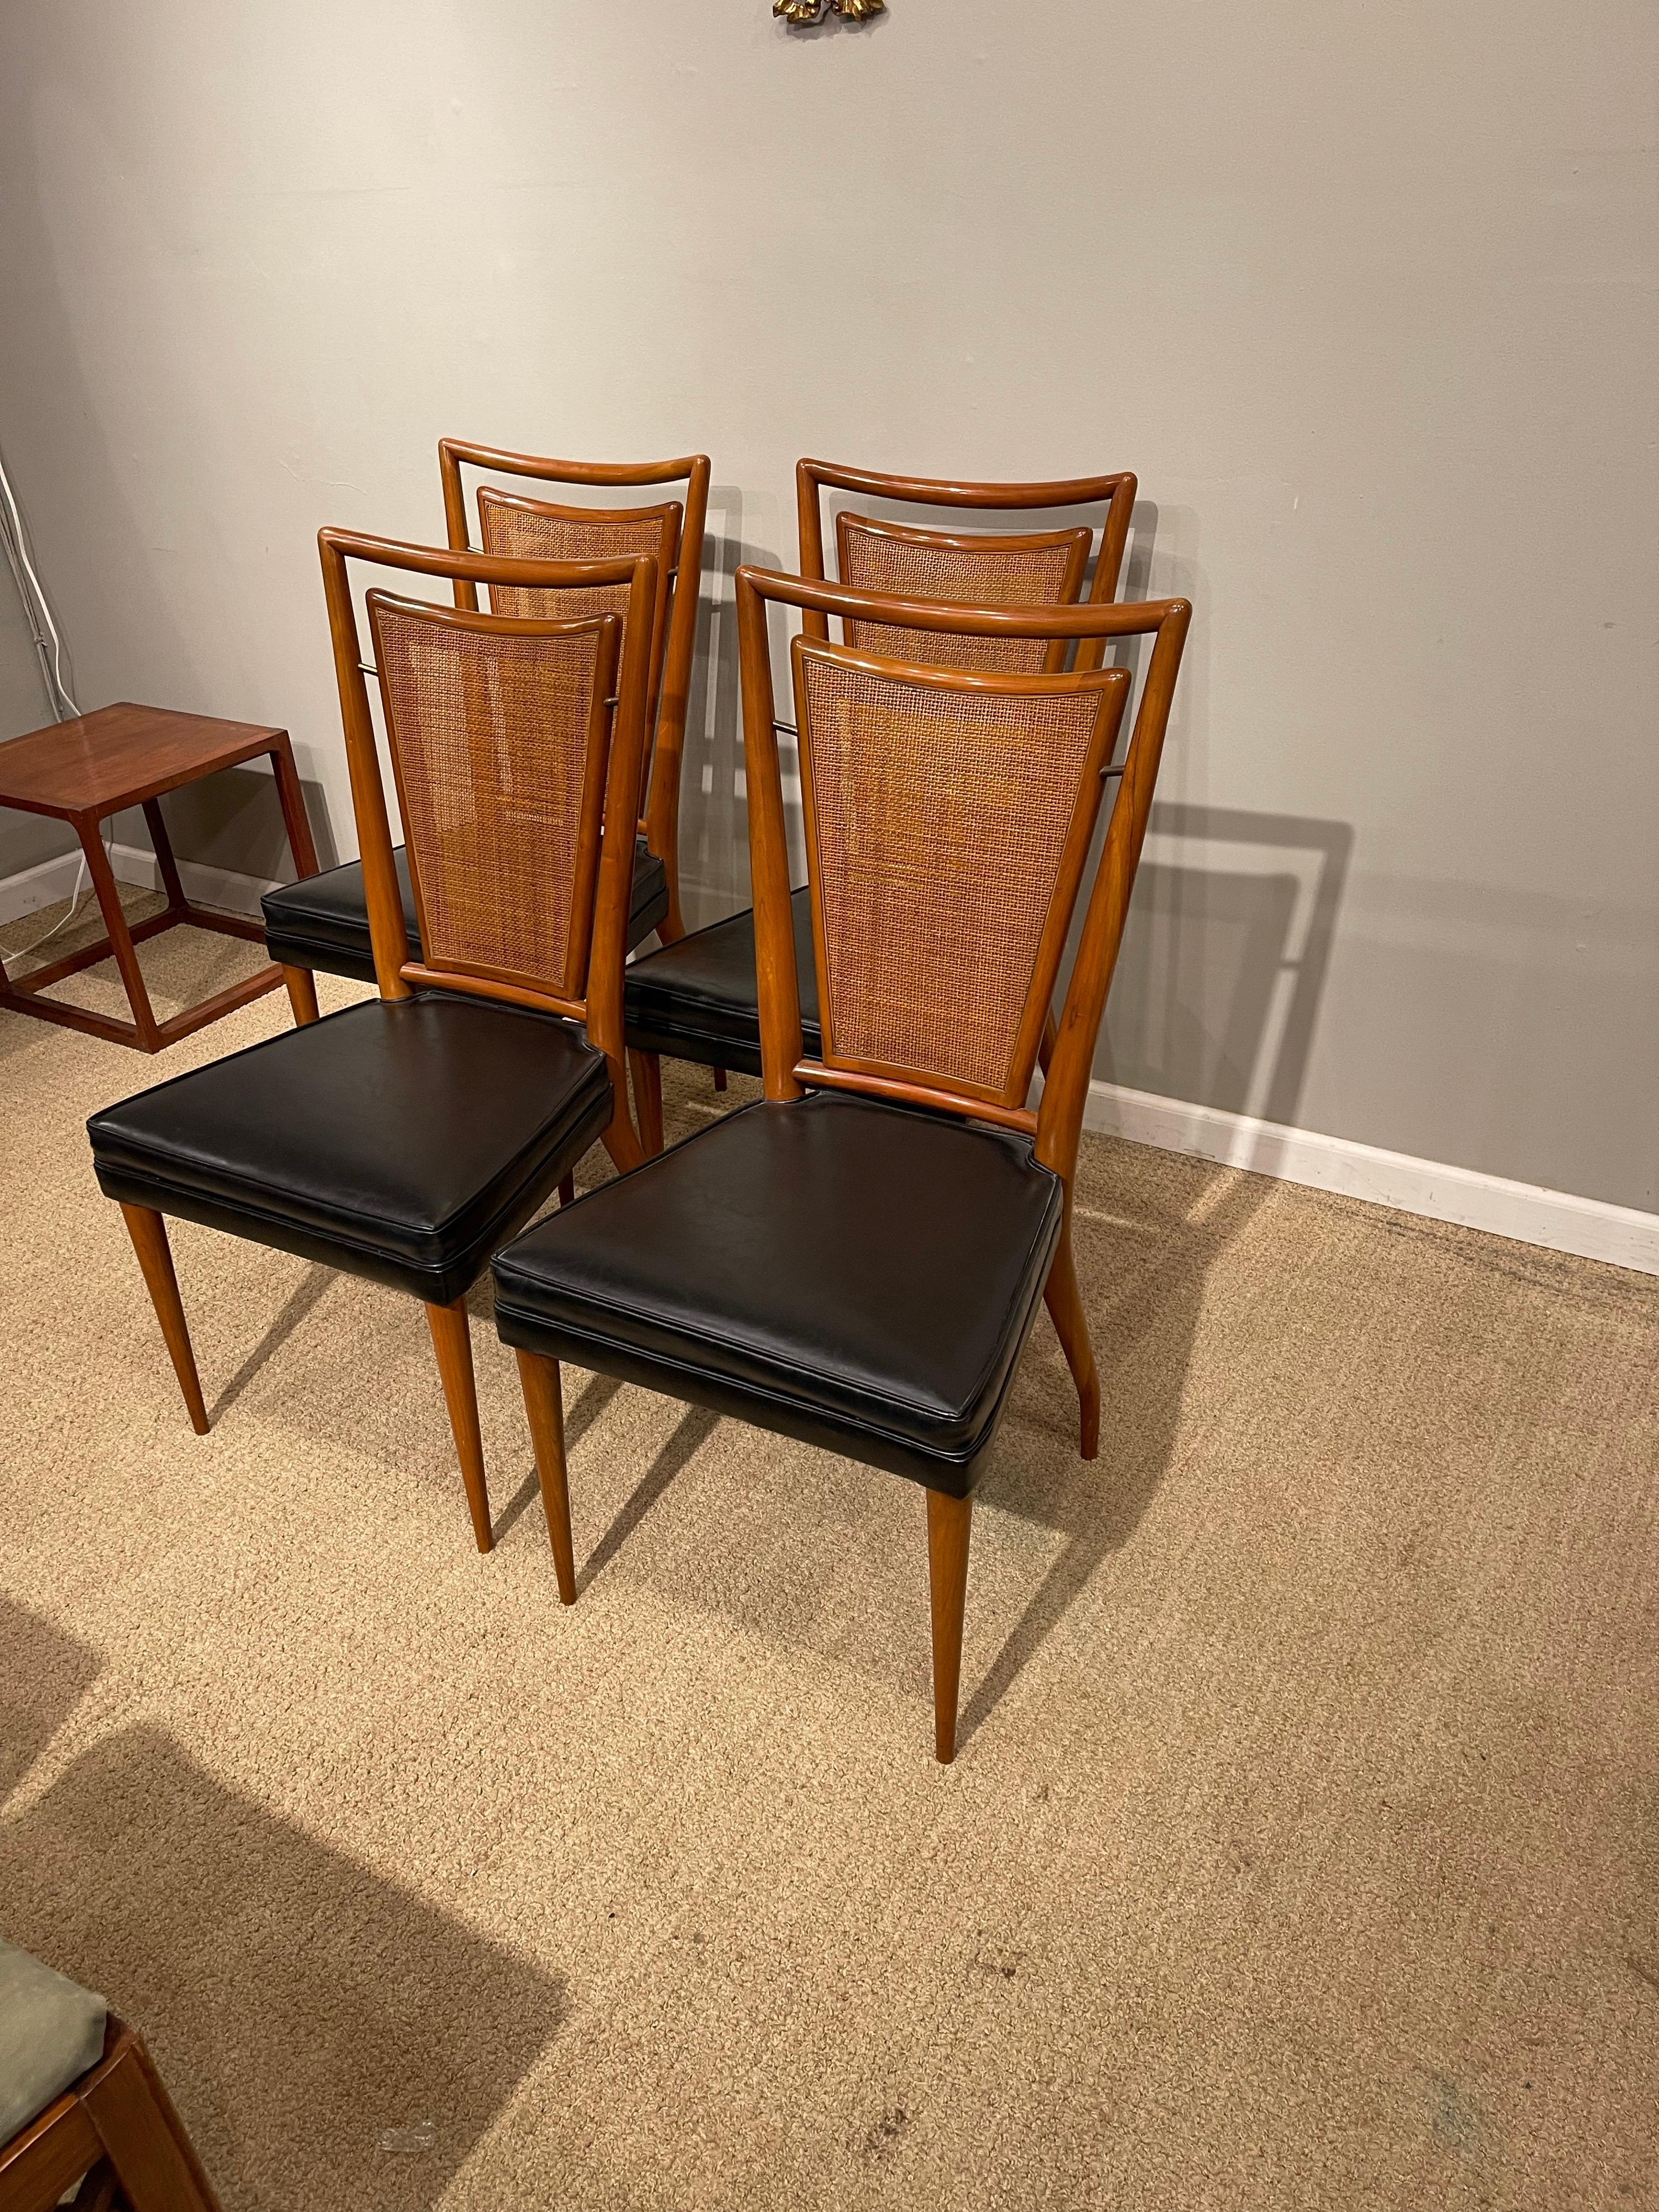 A Set of 6 John Widdicomb Mid-Century Modern dining chairs, 4 side-chairs & 2 arm-chairs

Measure: Seat height 17.5.